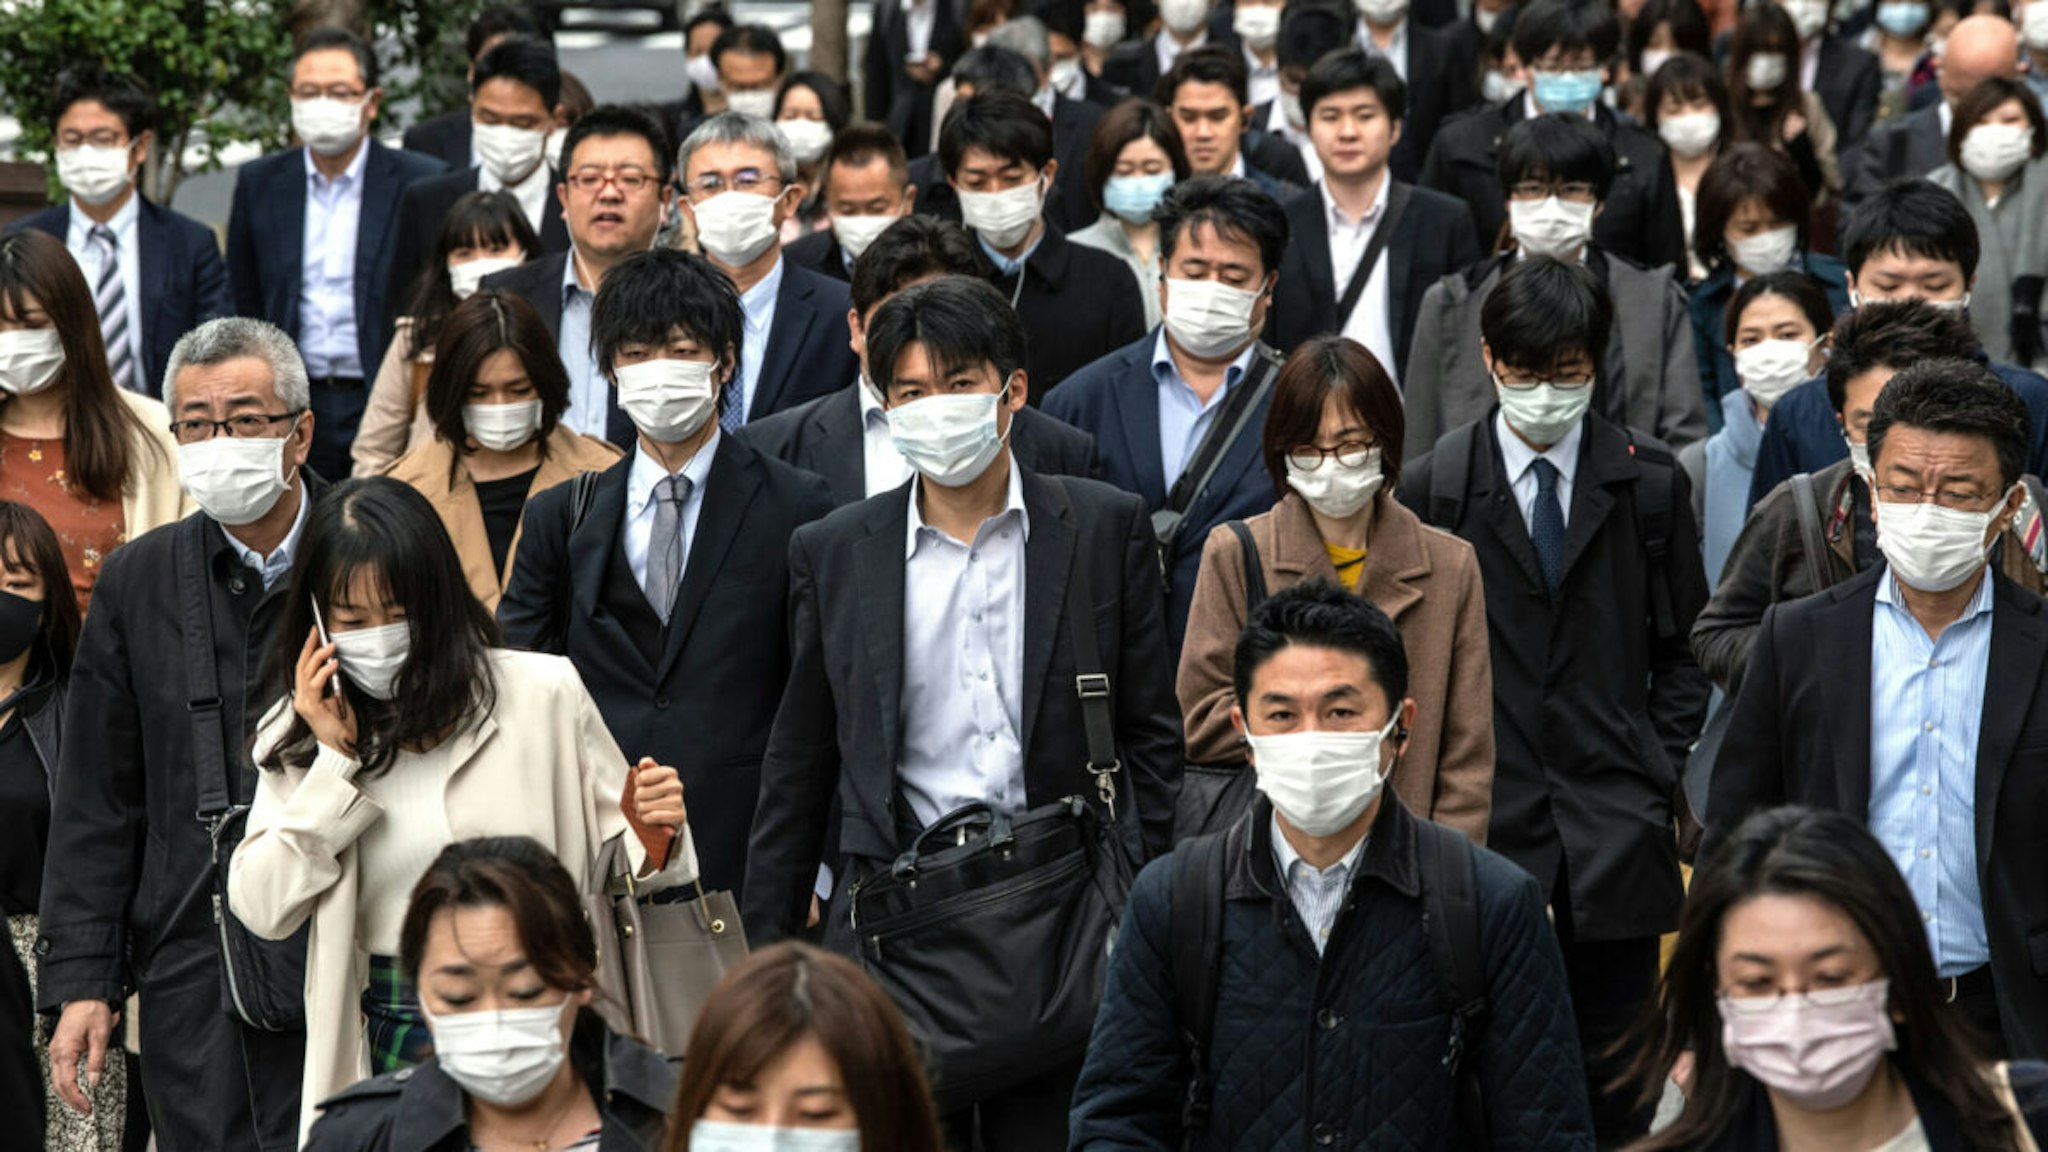 TOKYO, JAPAN - APRIL 07: Commuters wearing face masks walk to work the day before a state of emergency is expected to be imposed on April 7, 2020 in Tokyo, Japan. Japans Prime Minister, Shinzo Abe, yesterday announced that the government intends to declare a state of emergency that will cover 7 of Japans 47 prefectures, including Tokyo and Osaka, as the Covid-19 coronavirus outbreak continues to spread in the country. The move will allow affected prefectures to take measures including expropriating private land and buildings and requisitioning medical supplies and food from companies that refuse to sell them.